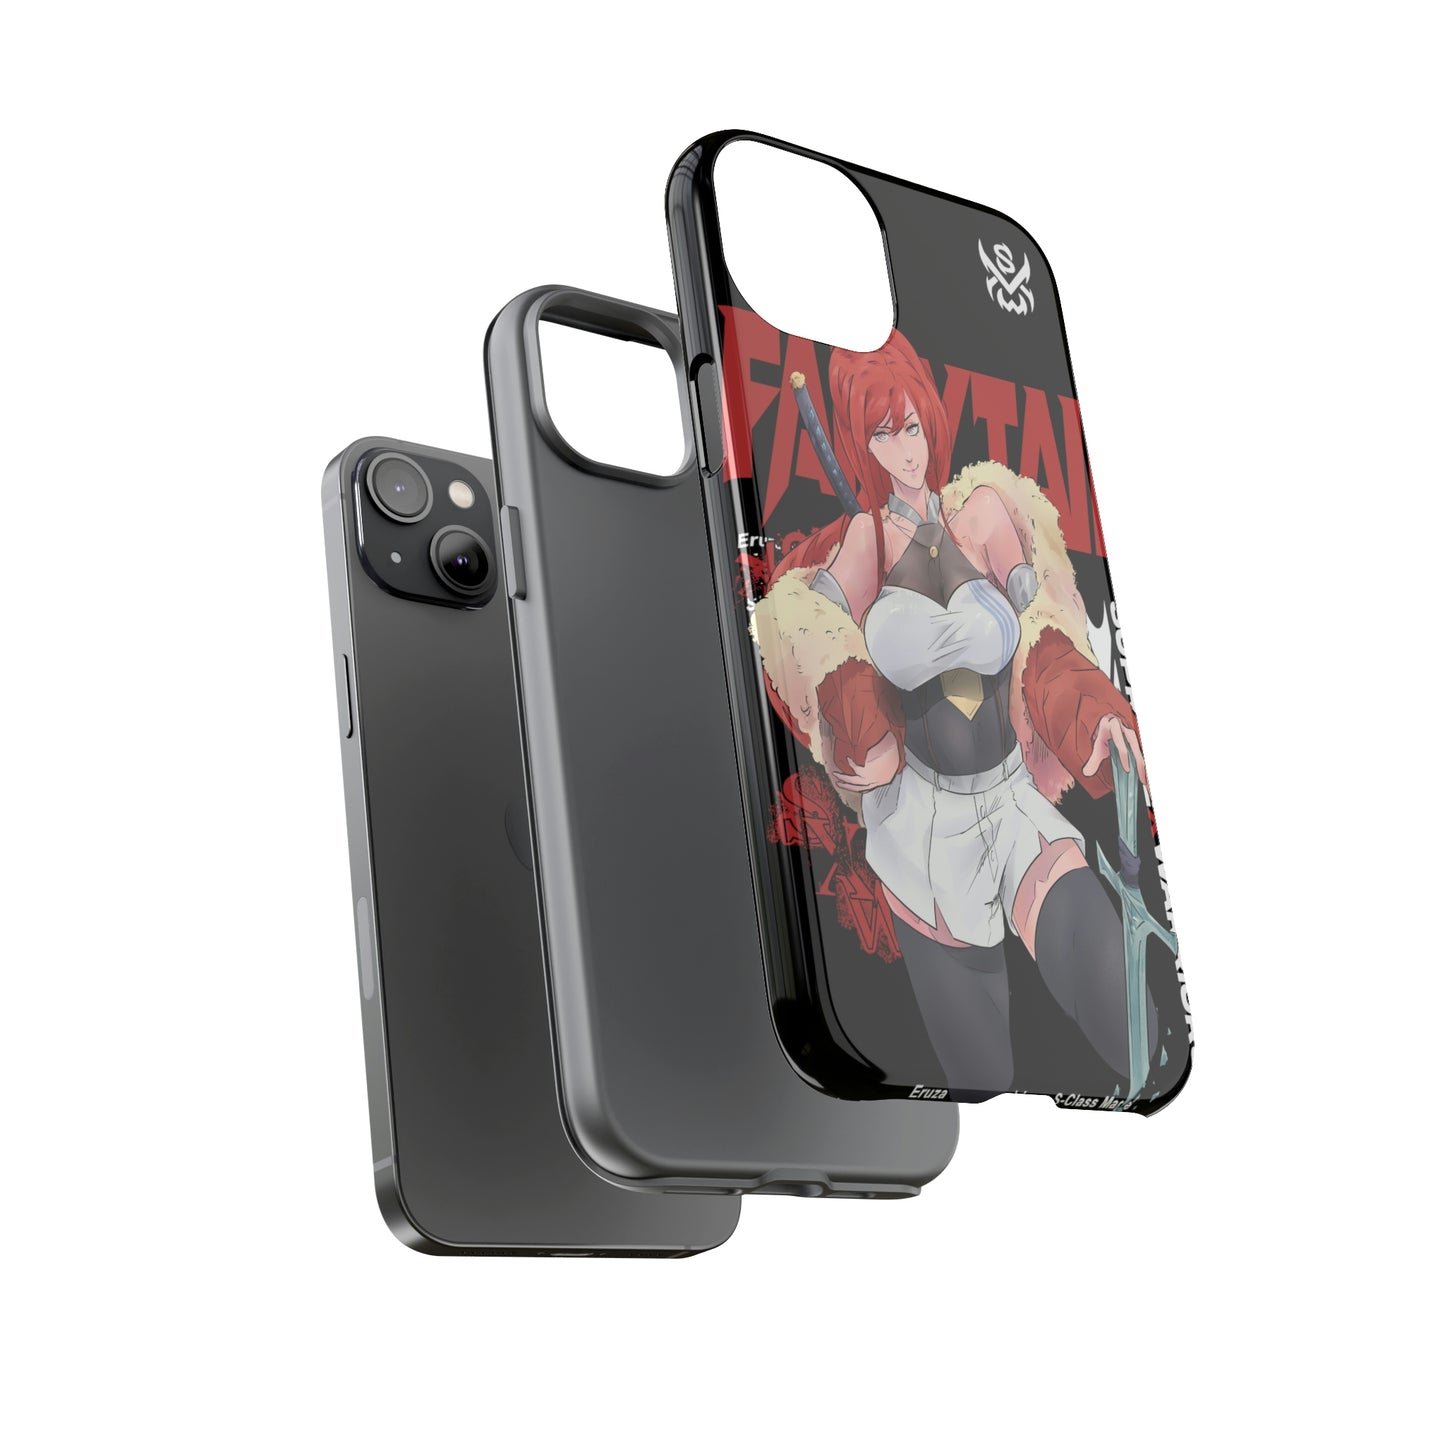 Scarlet / iPhone Cases - LIMITED